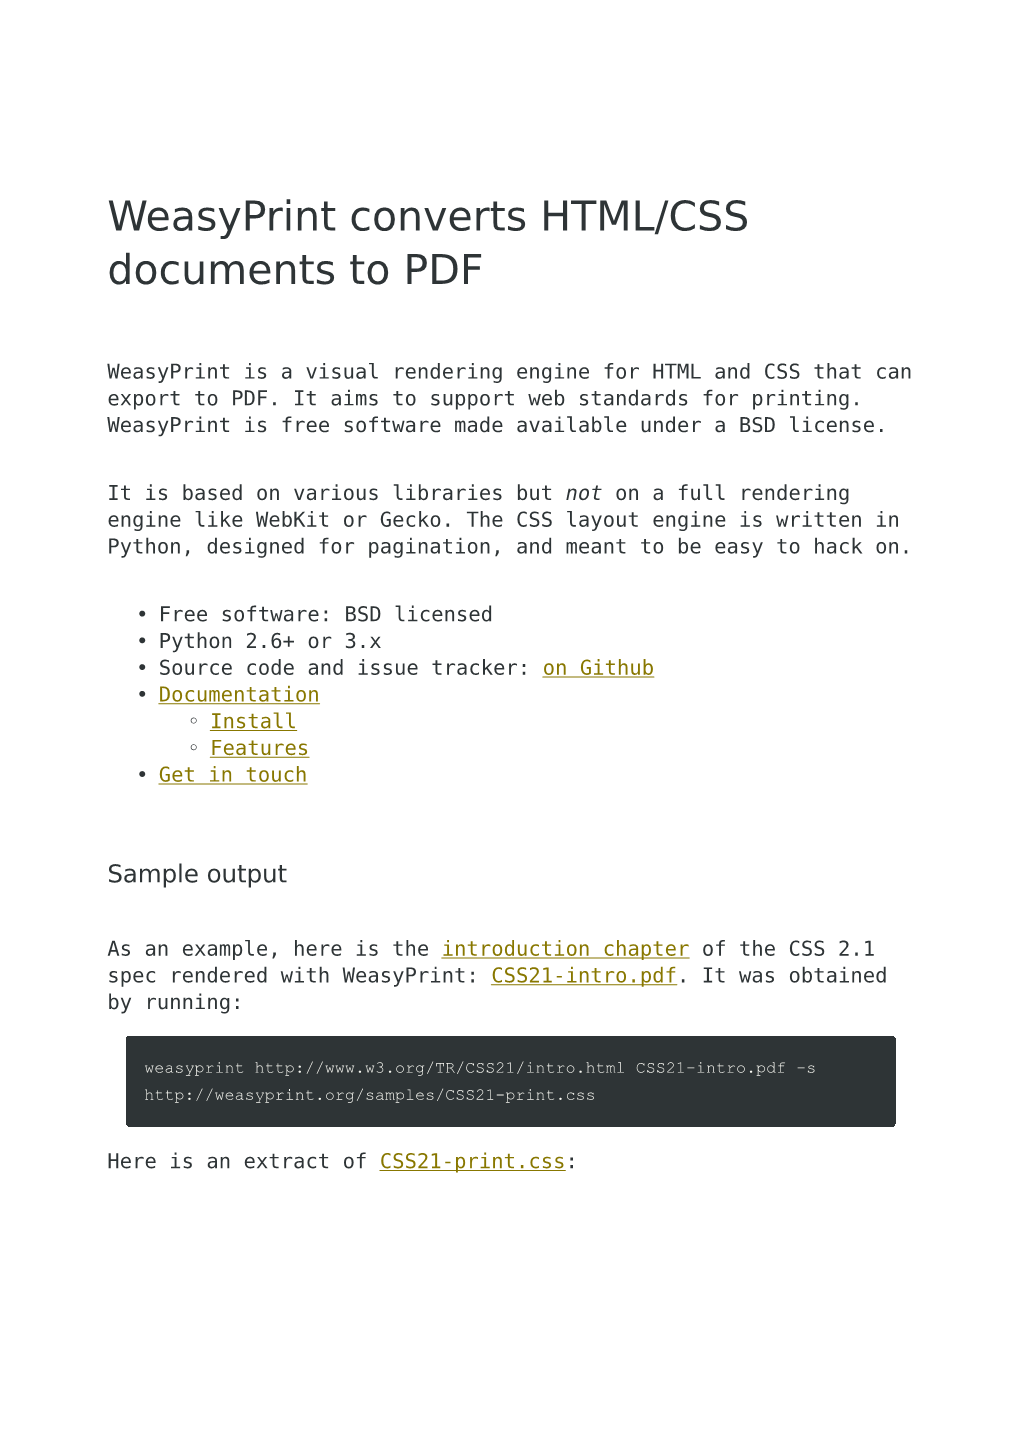 Weasyprint Converts HTML/CSS Documents to PDF